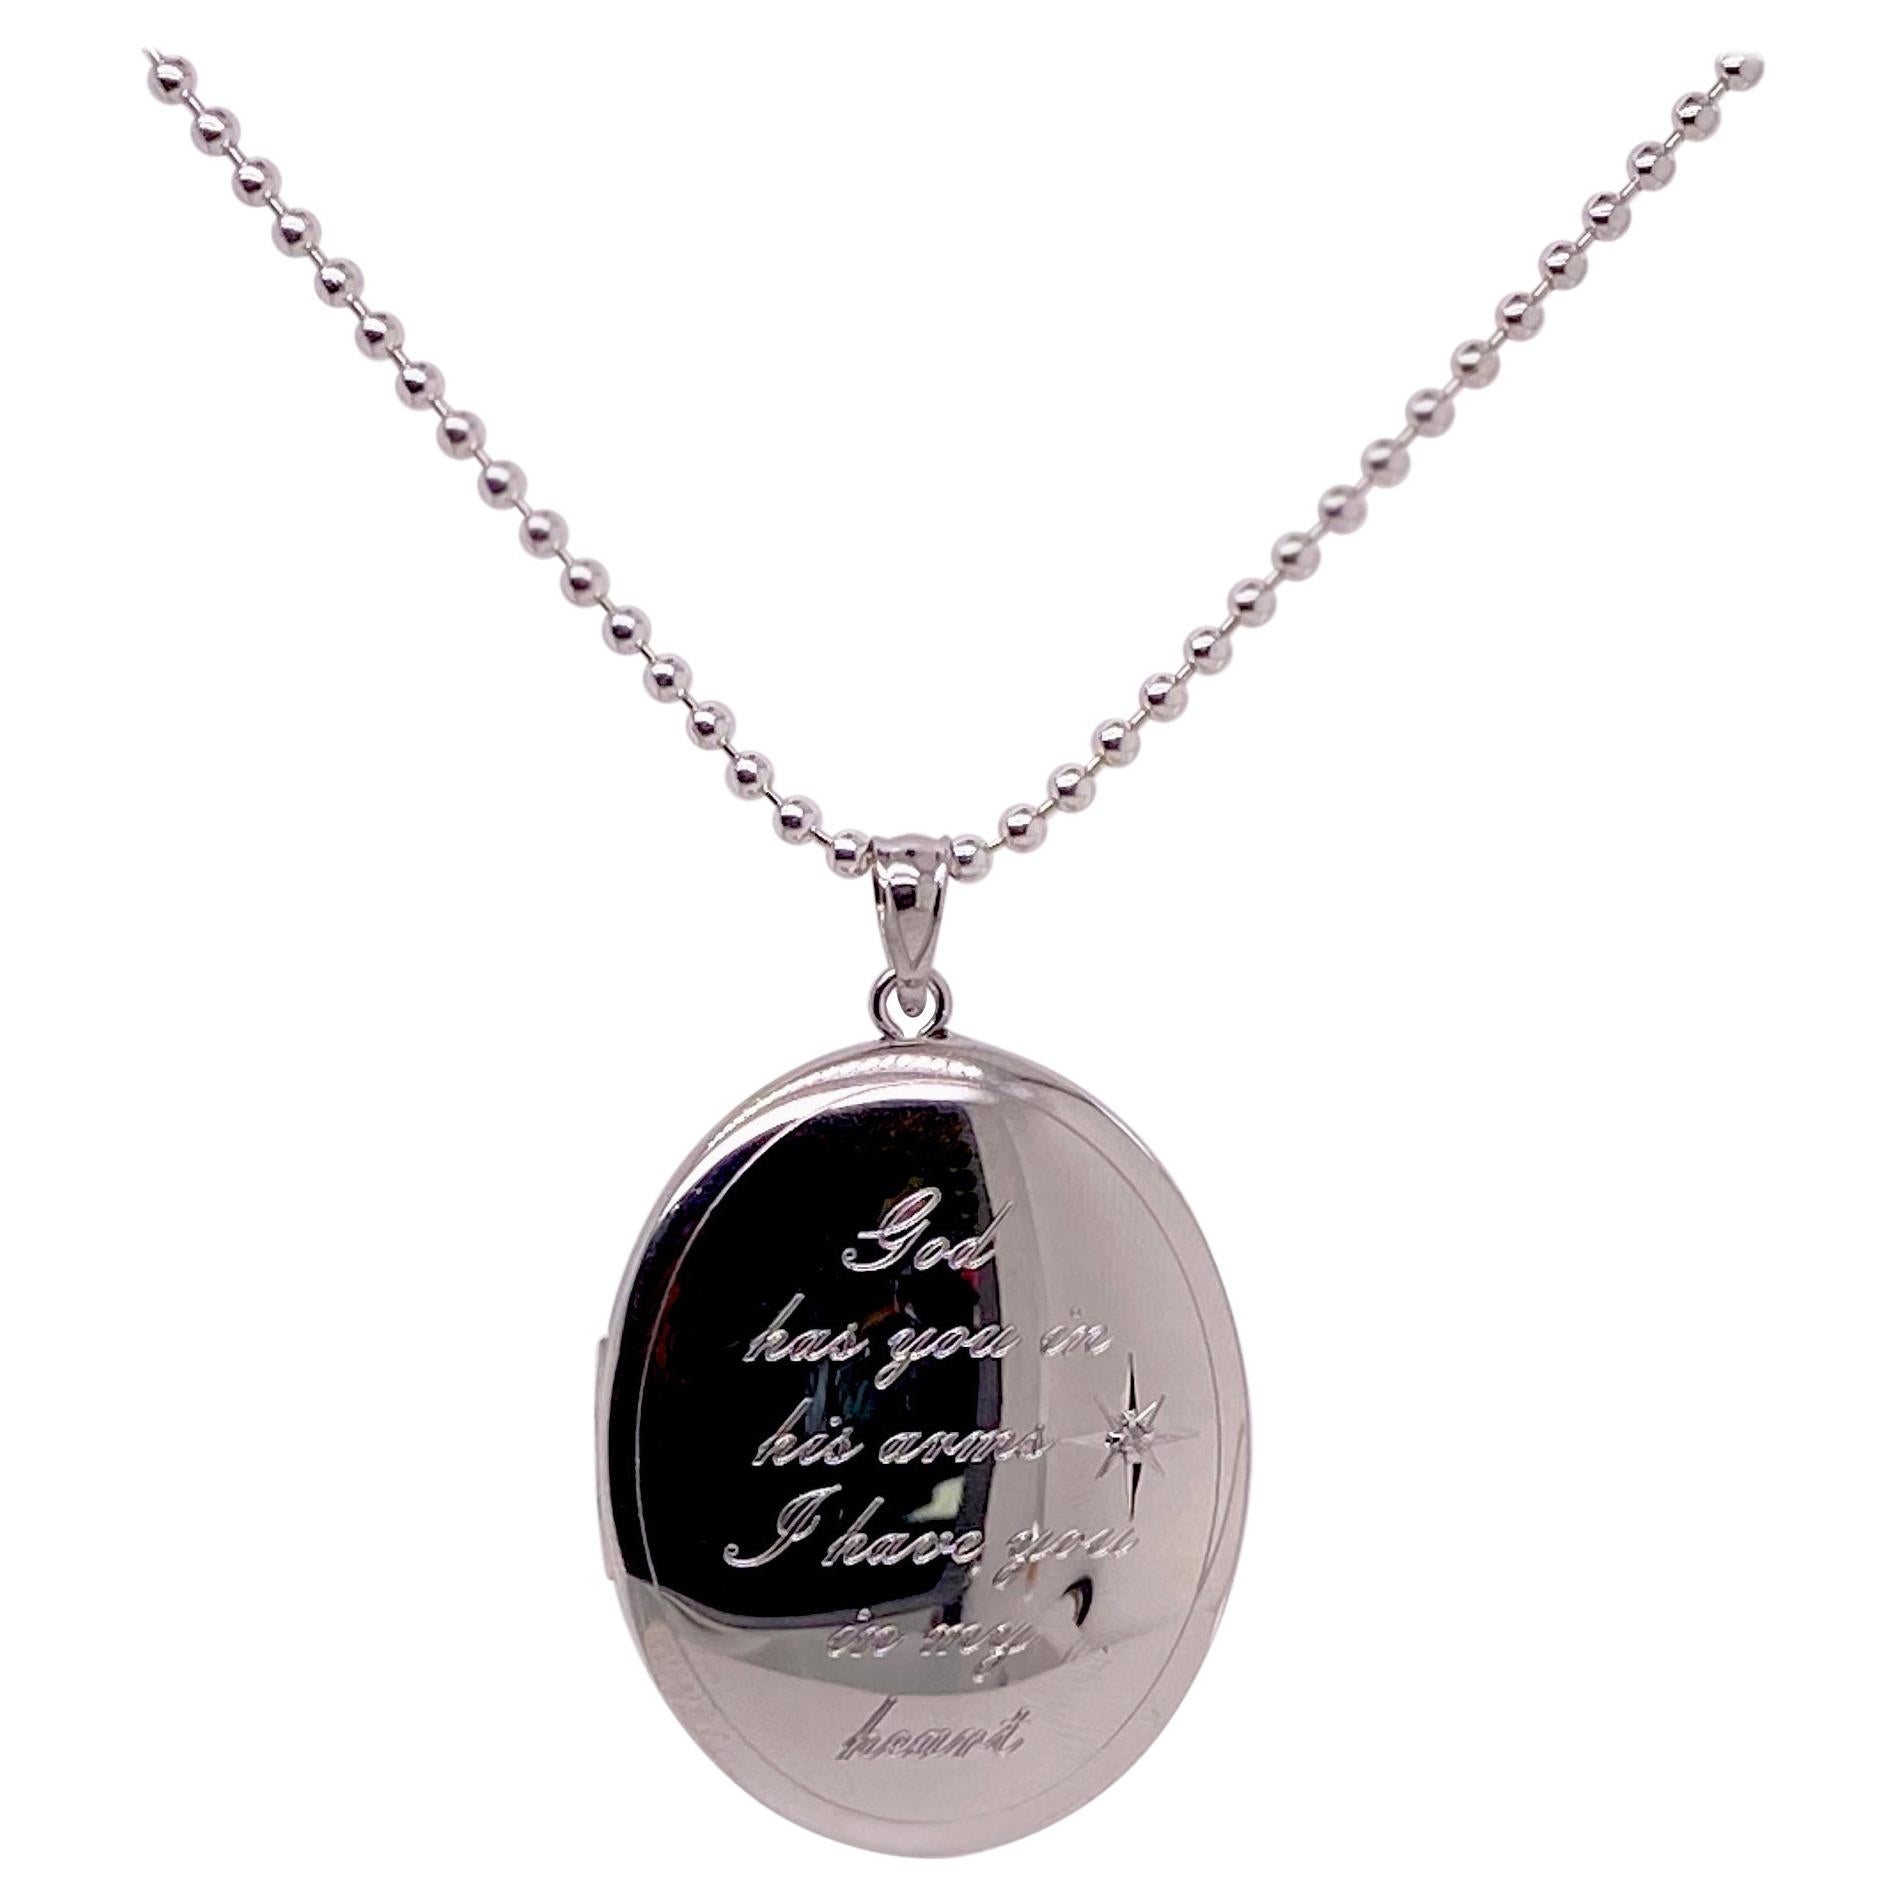 Engraved Locket Necklace w Urn to Hold Loved One’s Ashes, Has One Diamond For Sale